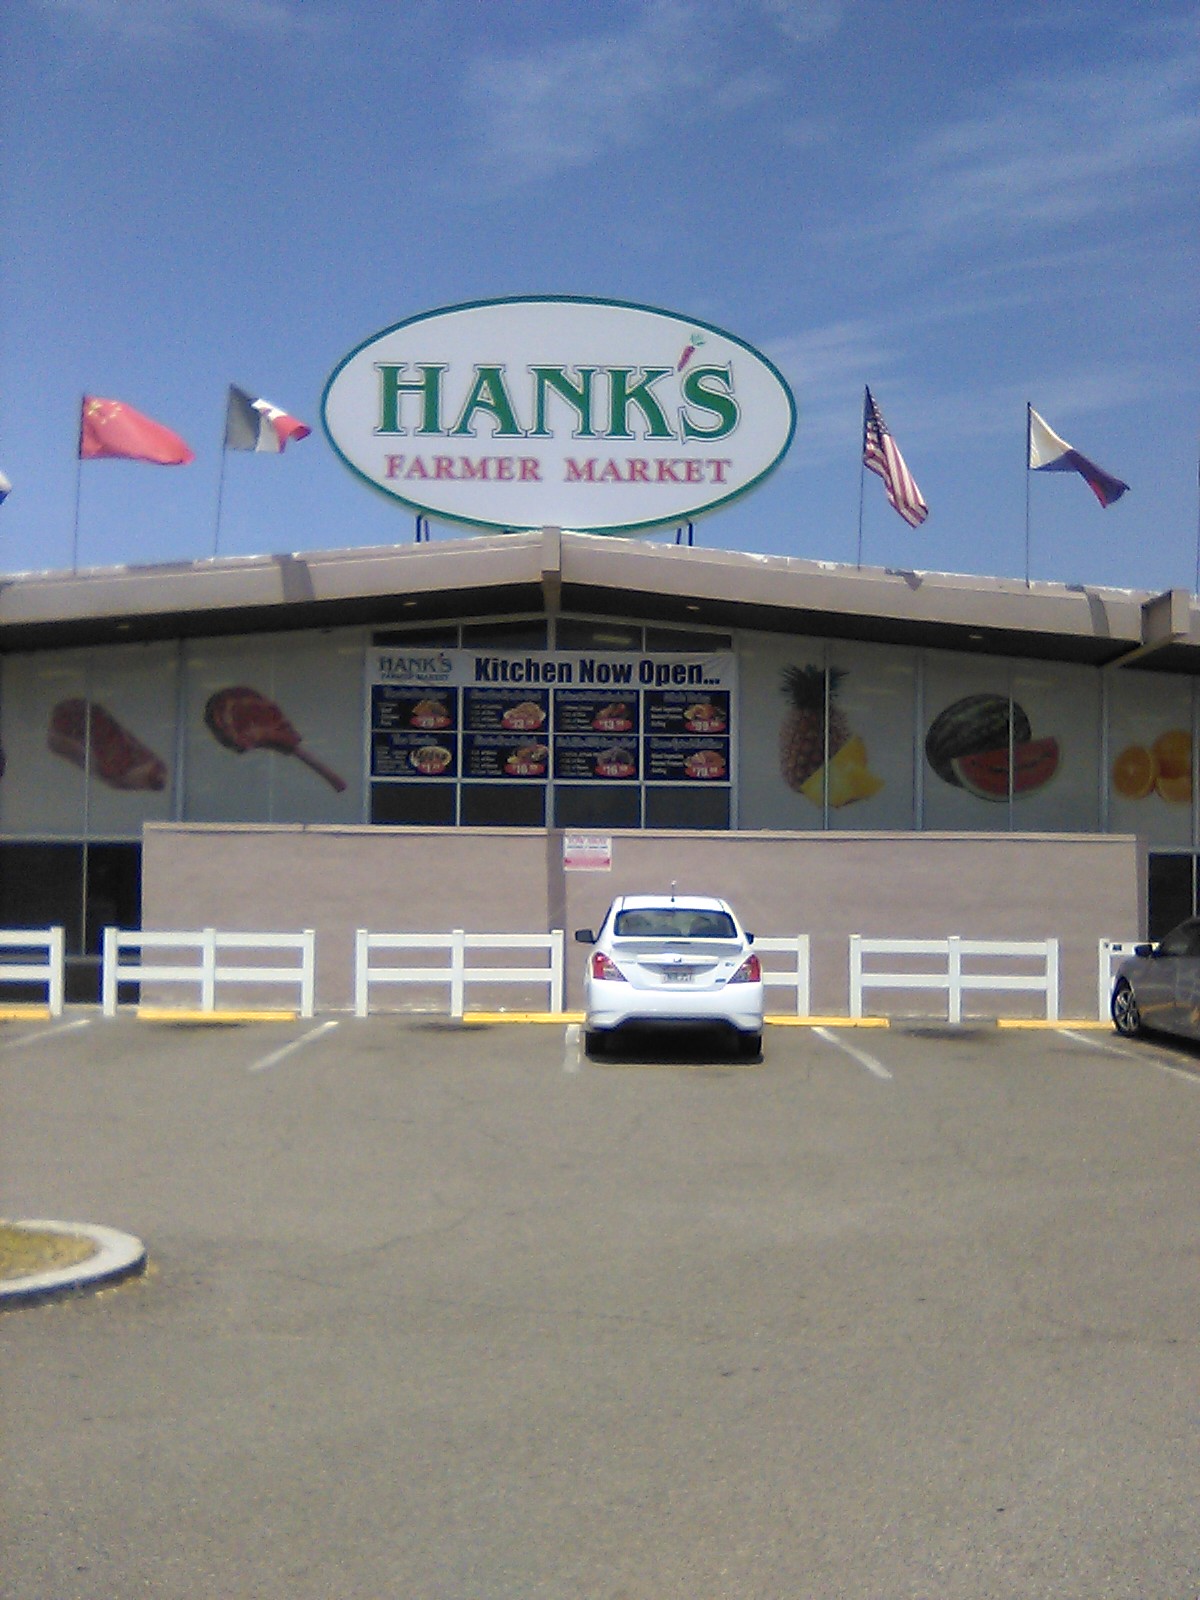 Fence in front of Hank's